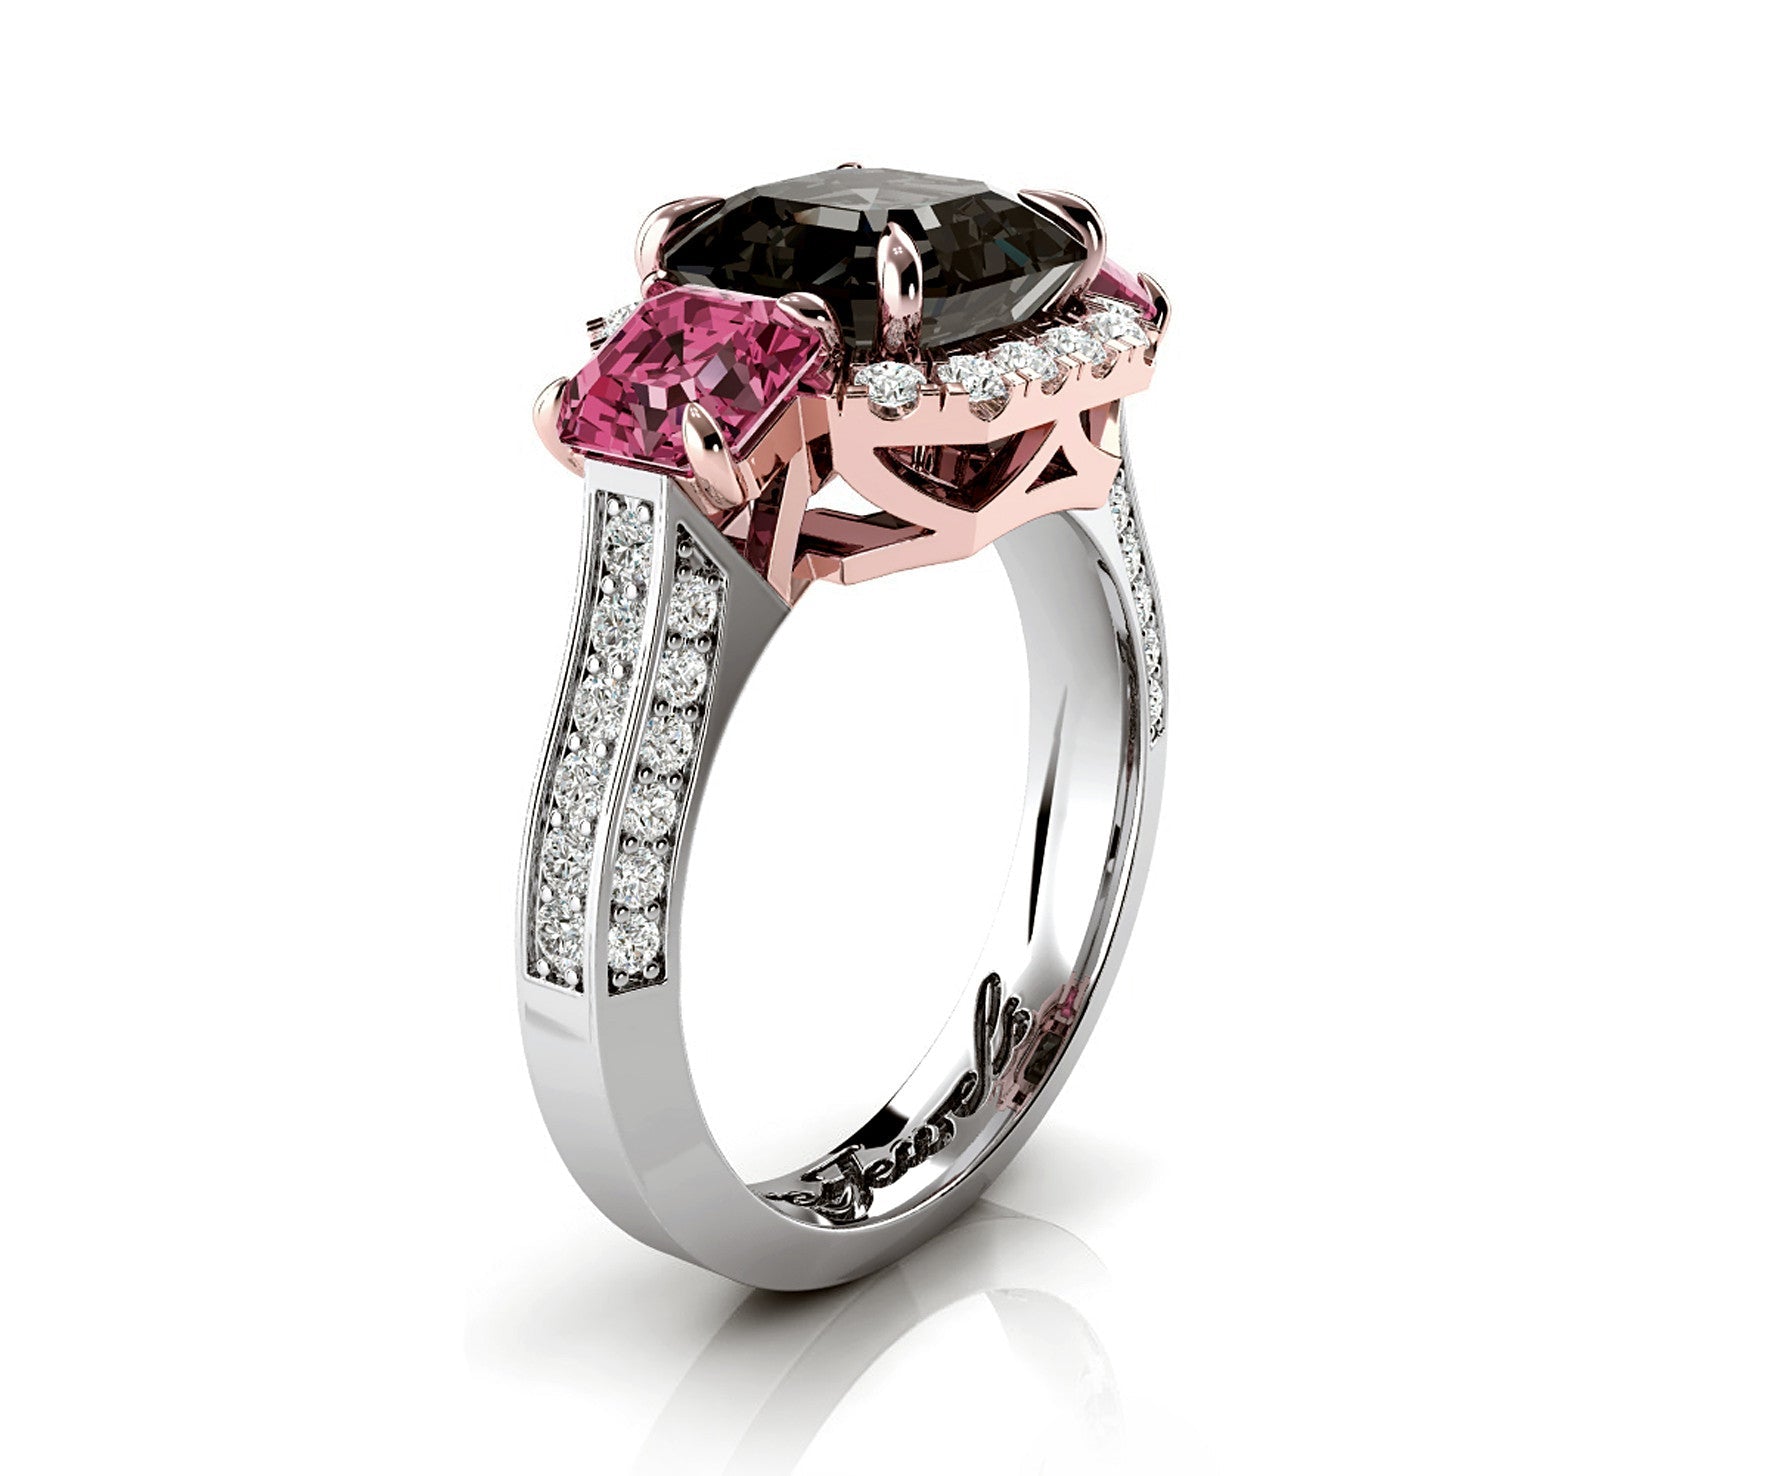 18ct White and rose gold pink and grey spinel Diamond dress ring - ForeverJewels Design Studio 8